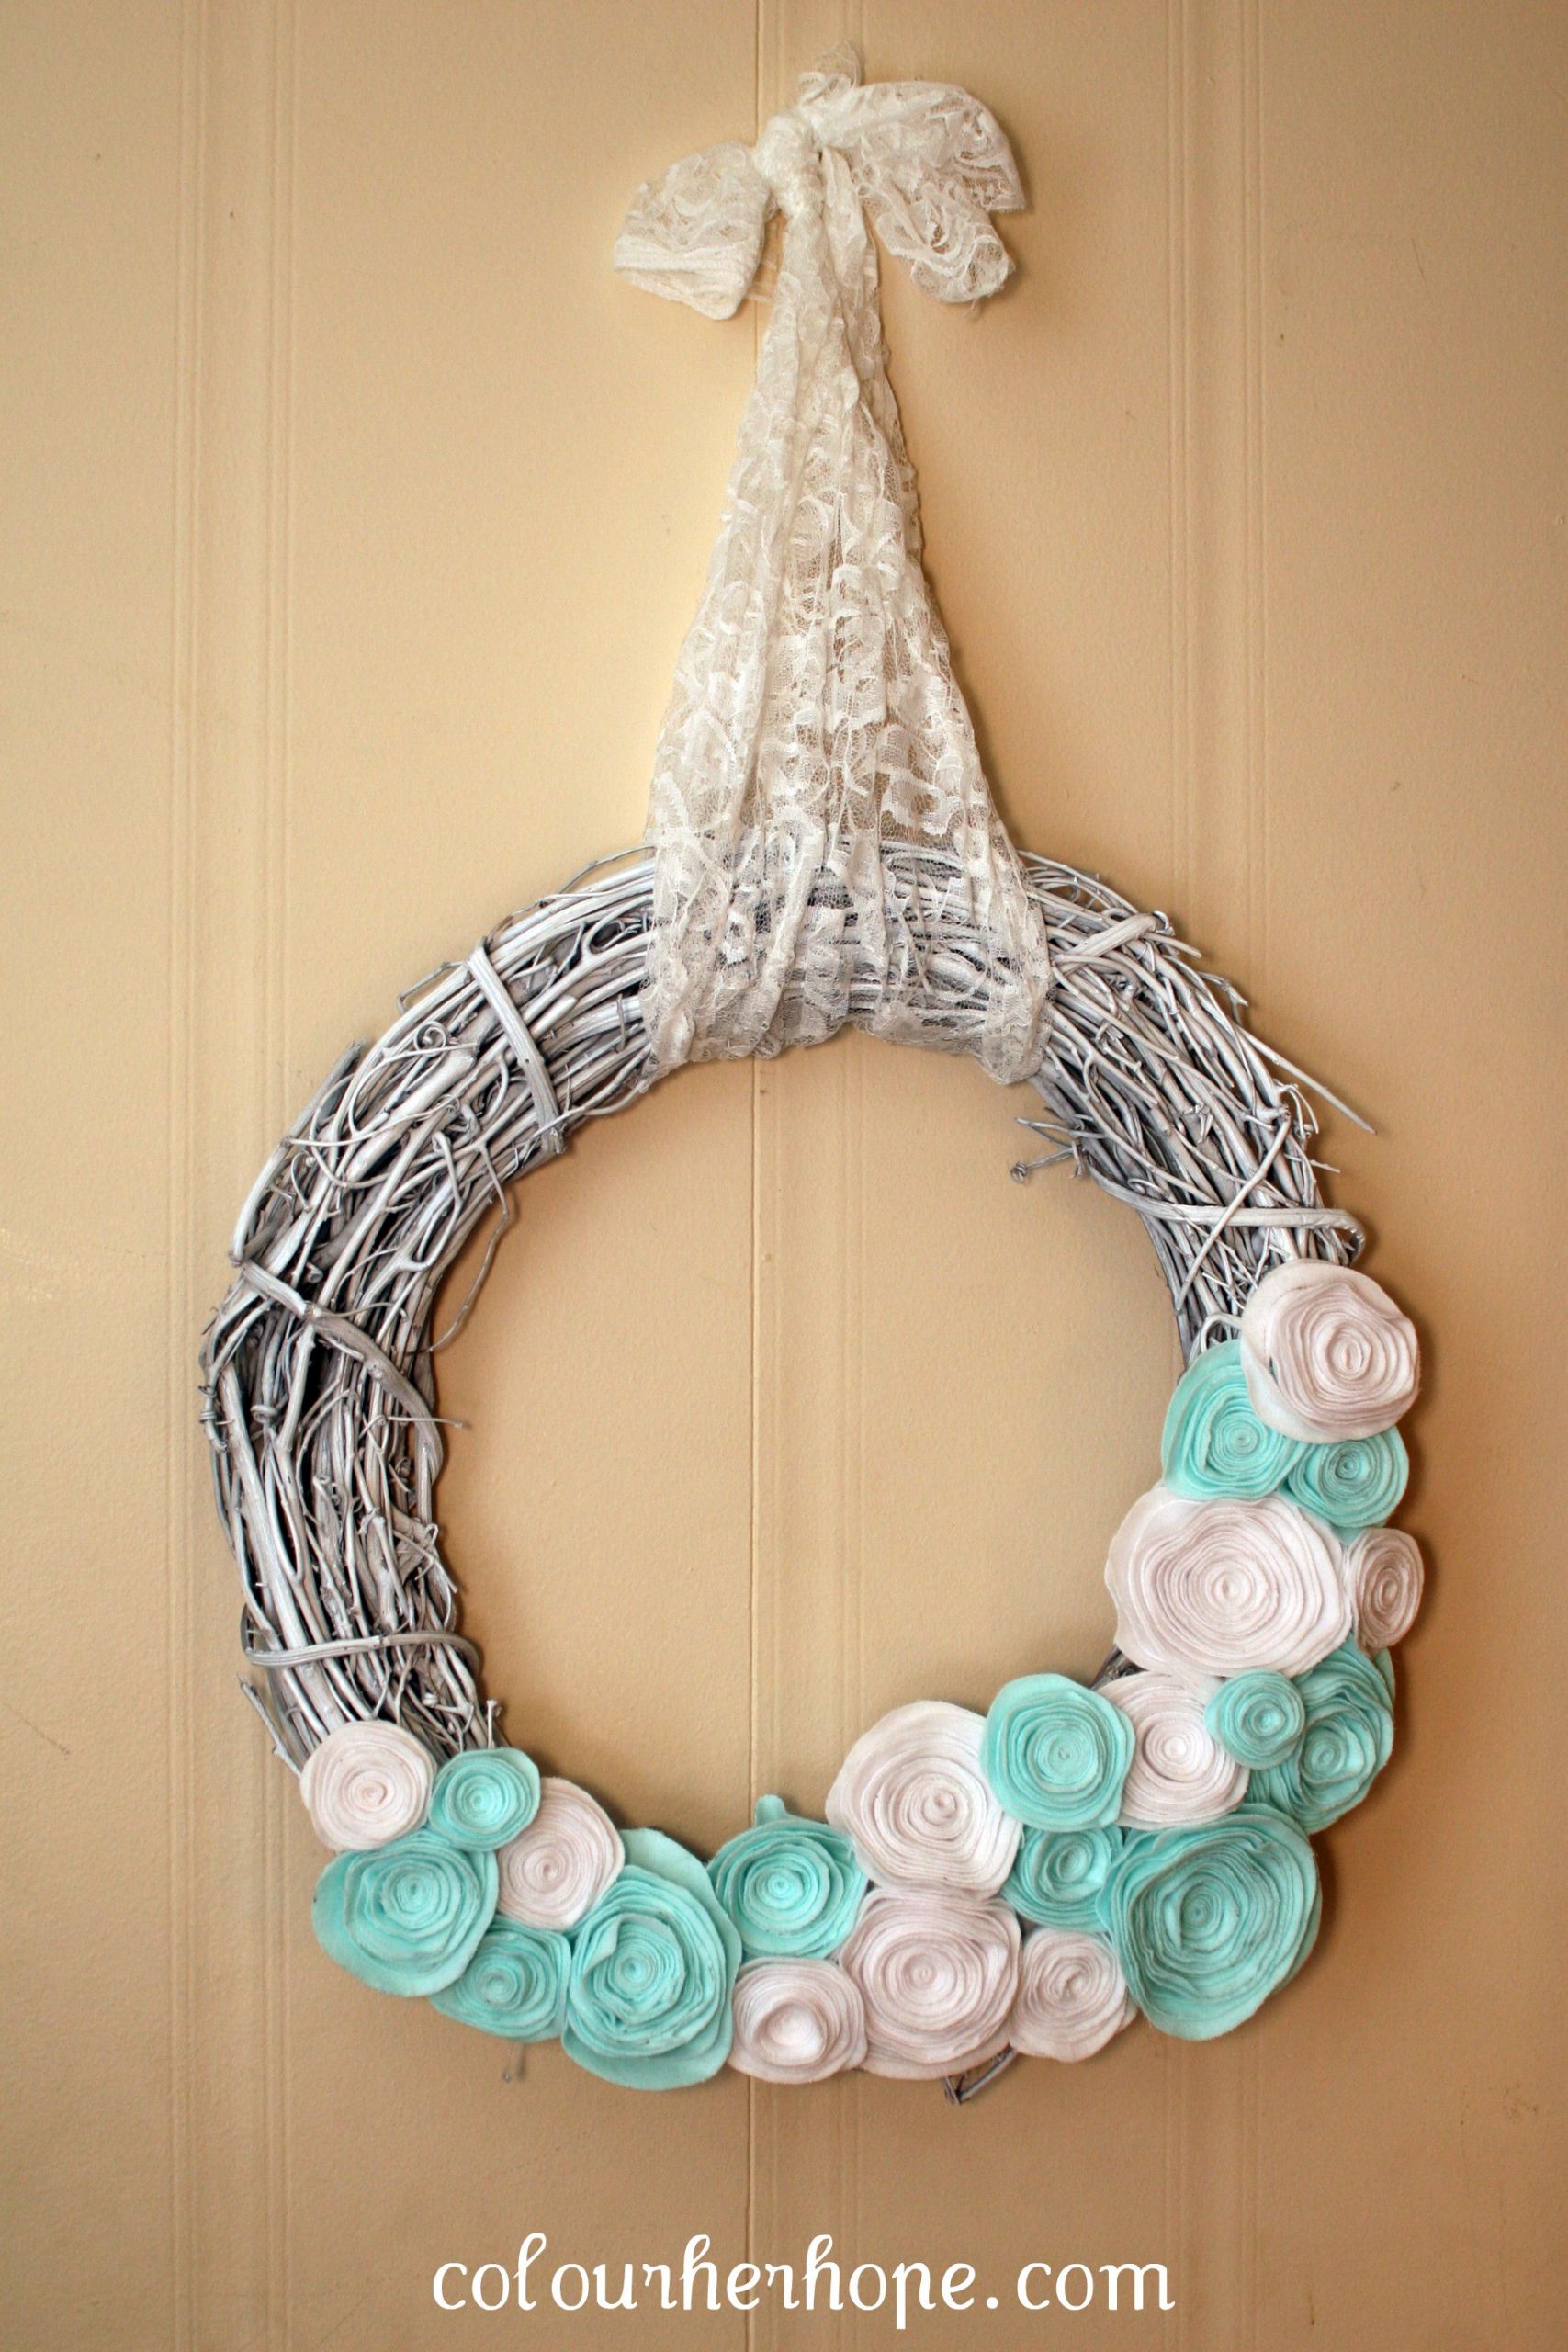 Winter Wreaths Diy
 Our Winter Wreath with DIY details